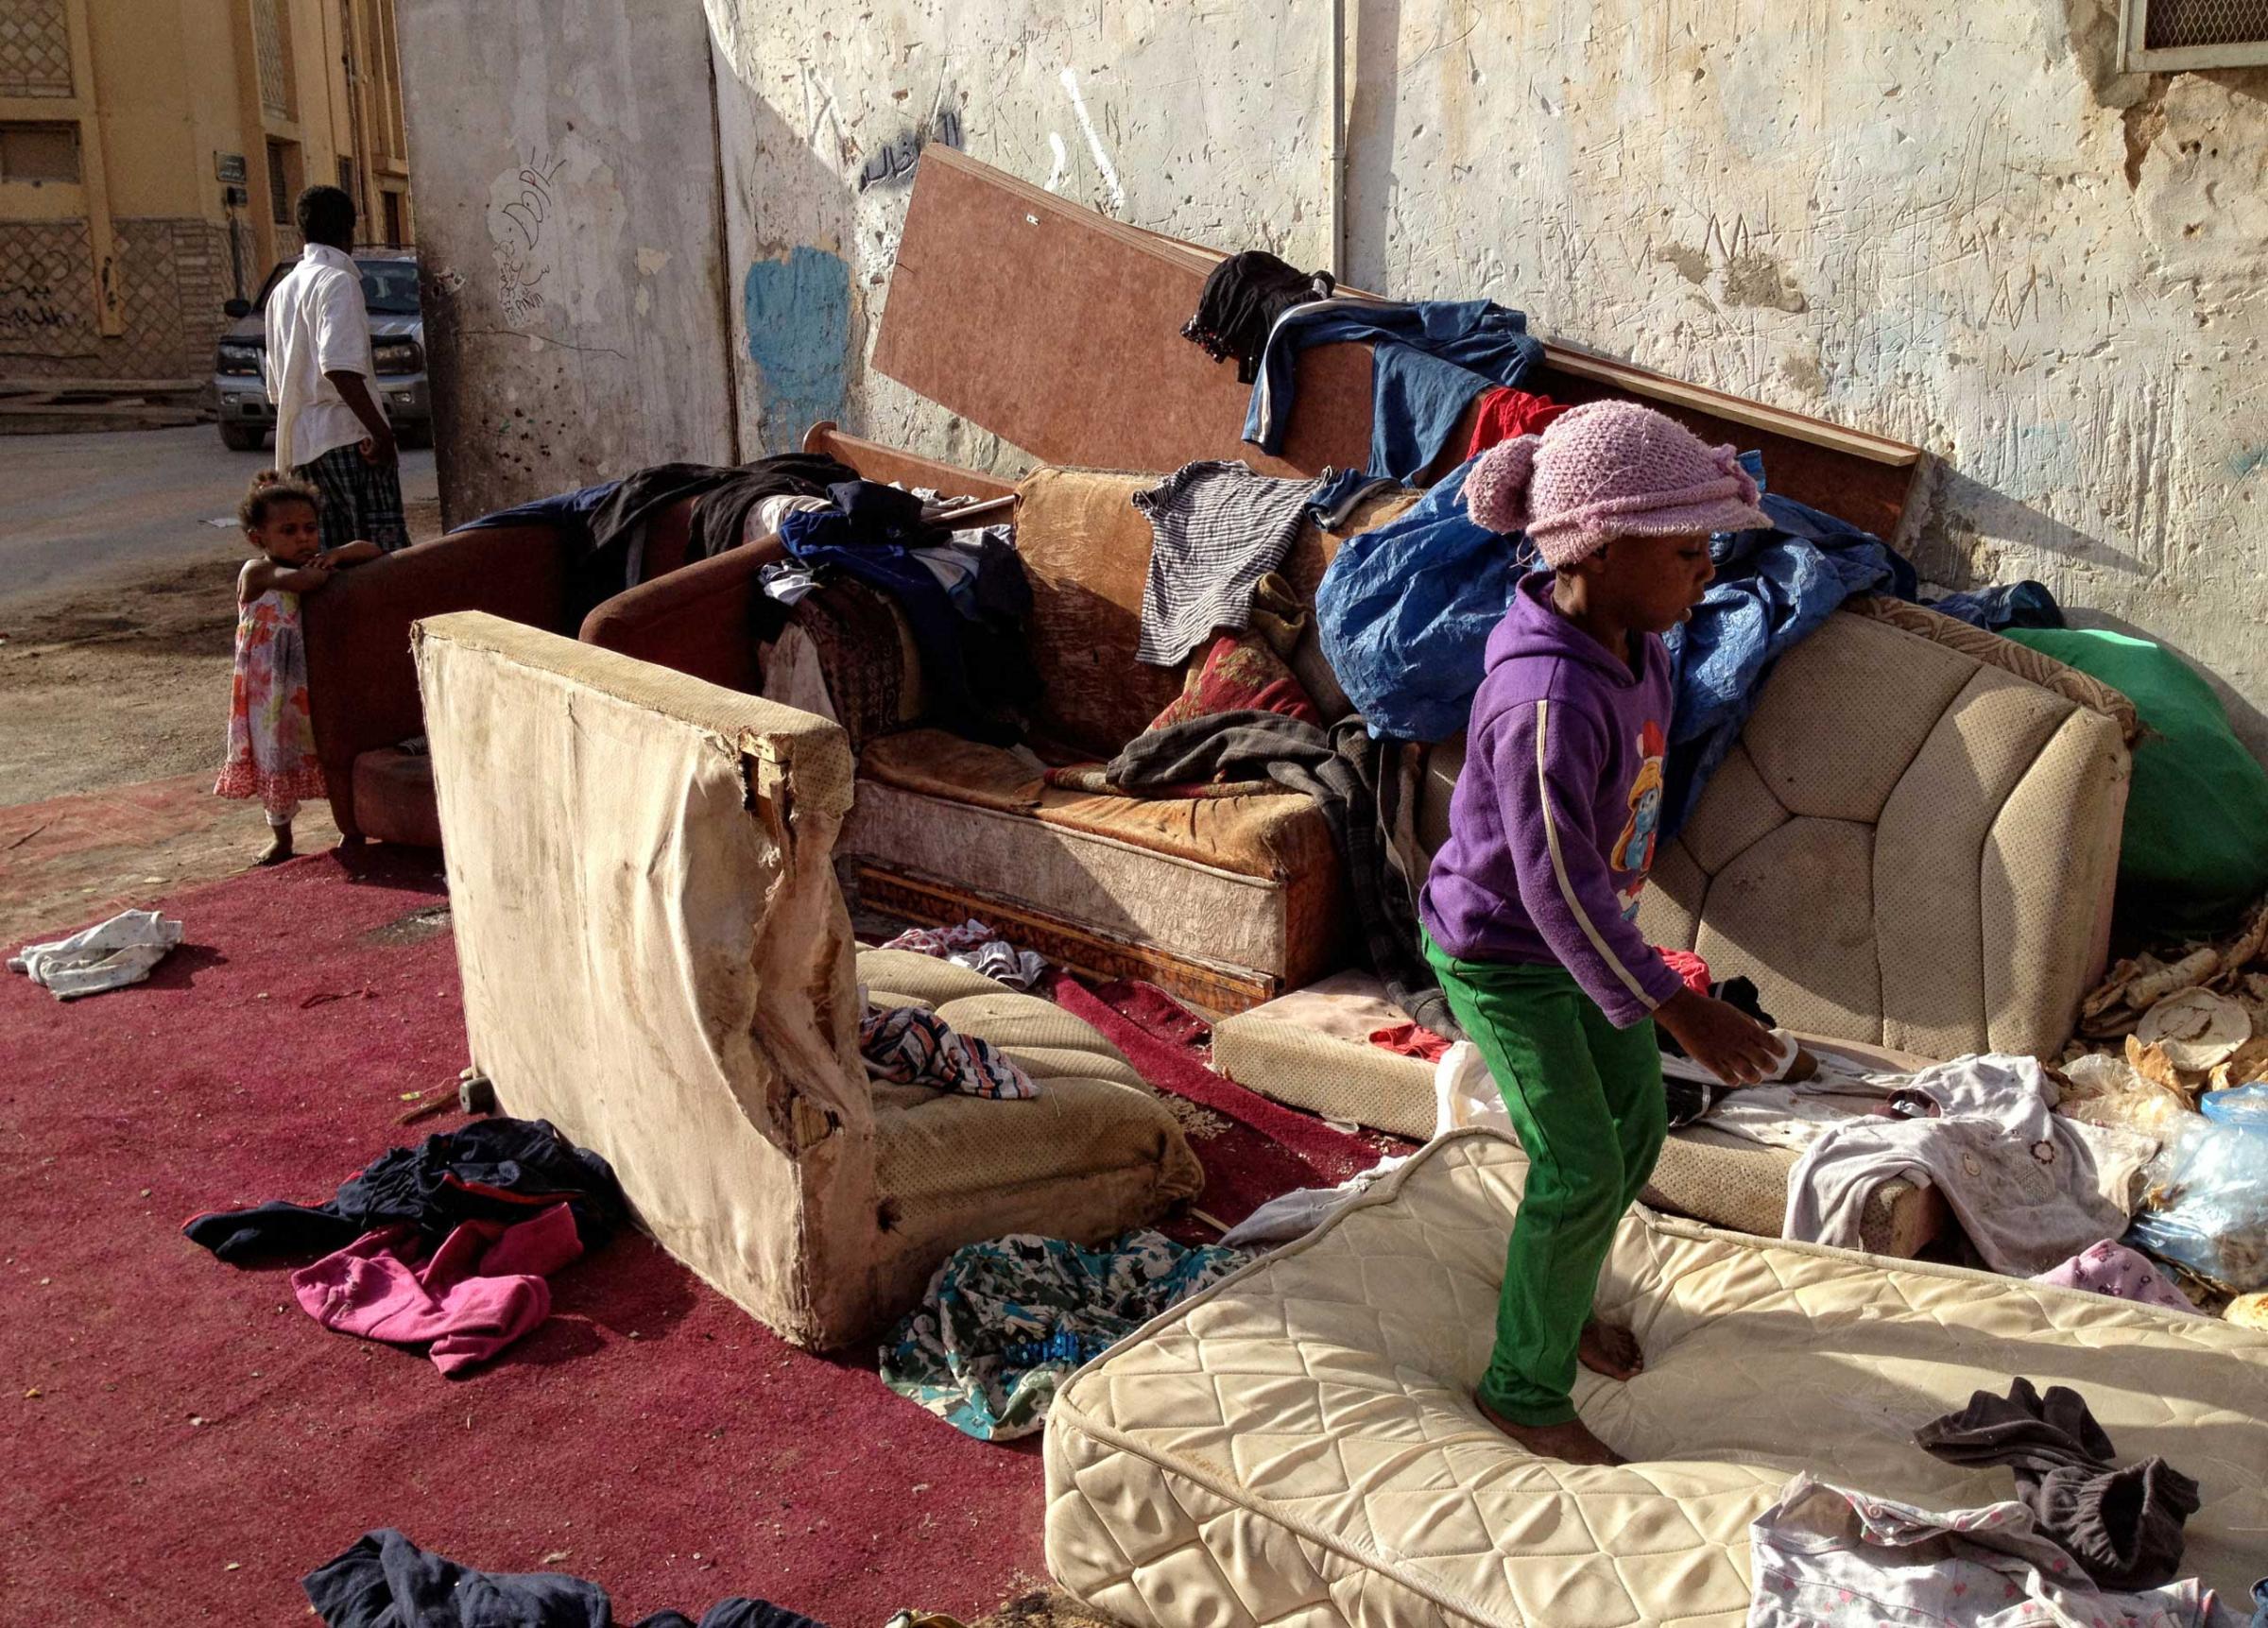 Saudi children play on old furniture outside of the home where they live in squalor in a neighborhood in South Riyadh, Saudi Arabia,  March 1, 2013.   Like many families across Saudi Arabia who are barely scraping above the poverty line each month, this family relies on the hope of the charity of others to survive. (Credit: Lynsey Addario/ VII)